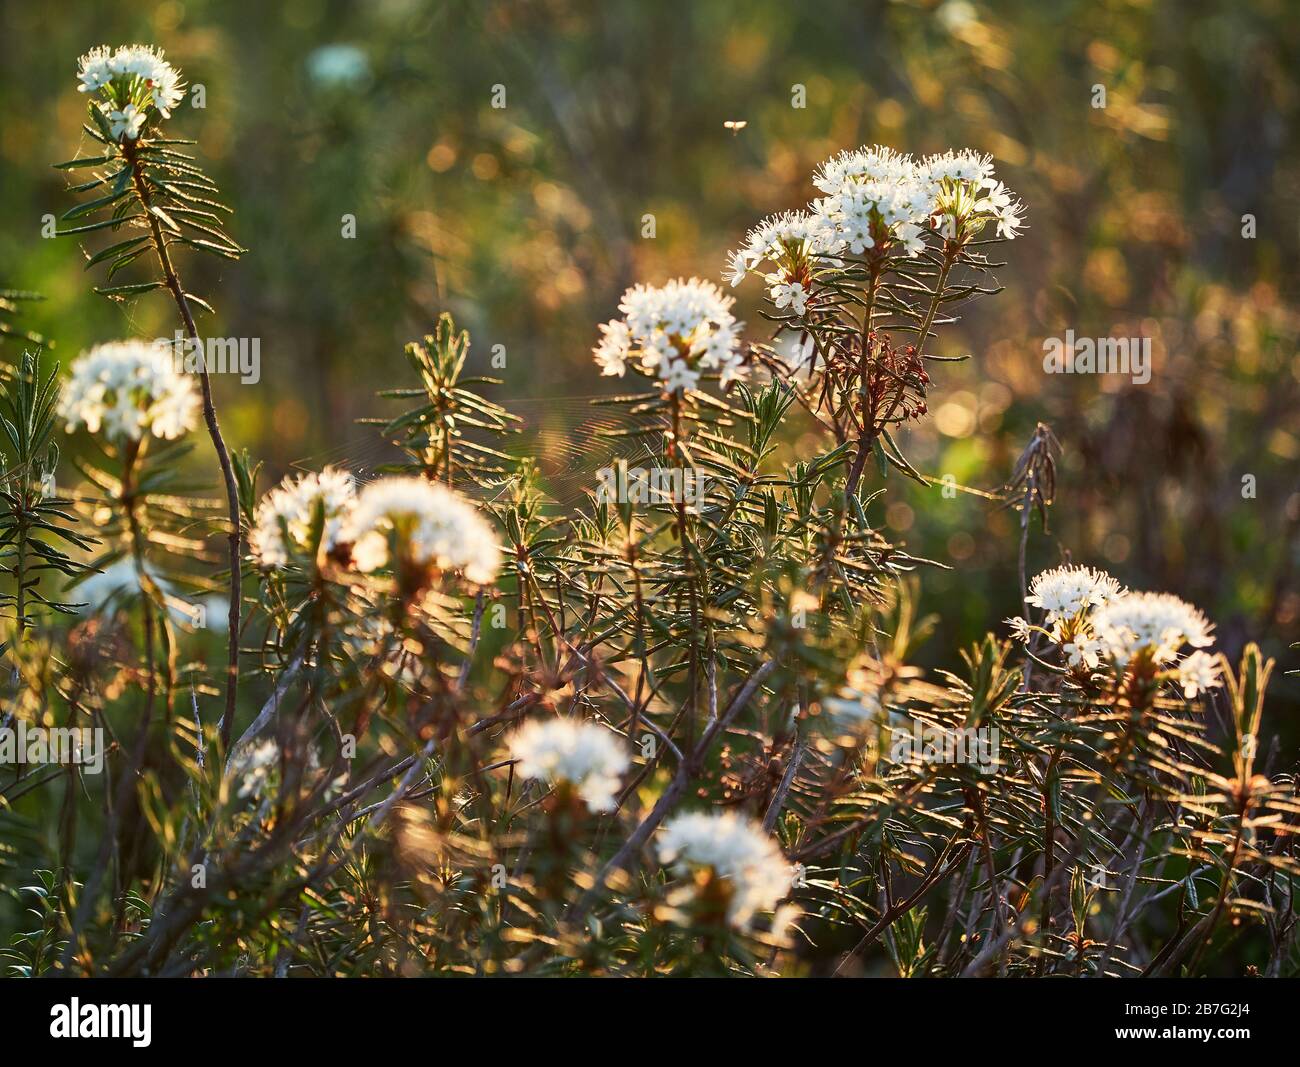 Closeup of marsh Labrador tea, Rhododendron tomentosum plant in the autumn sunlight. Selective focus, blurred background. Stock Photo